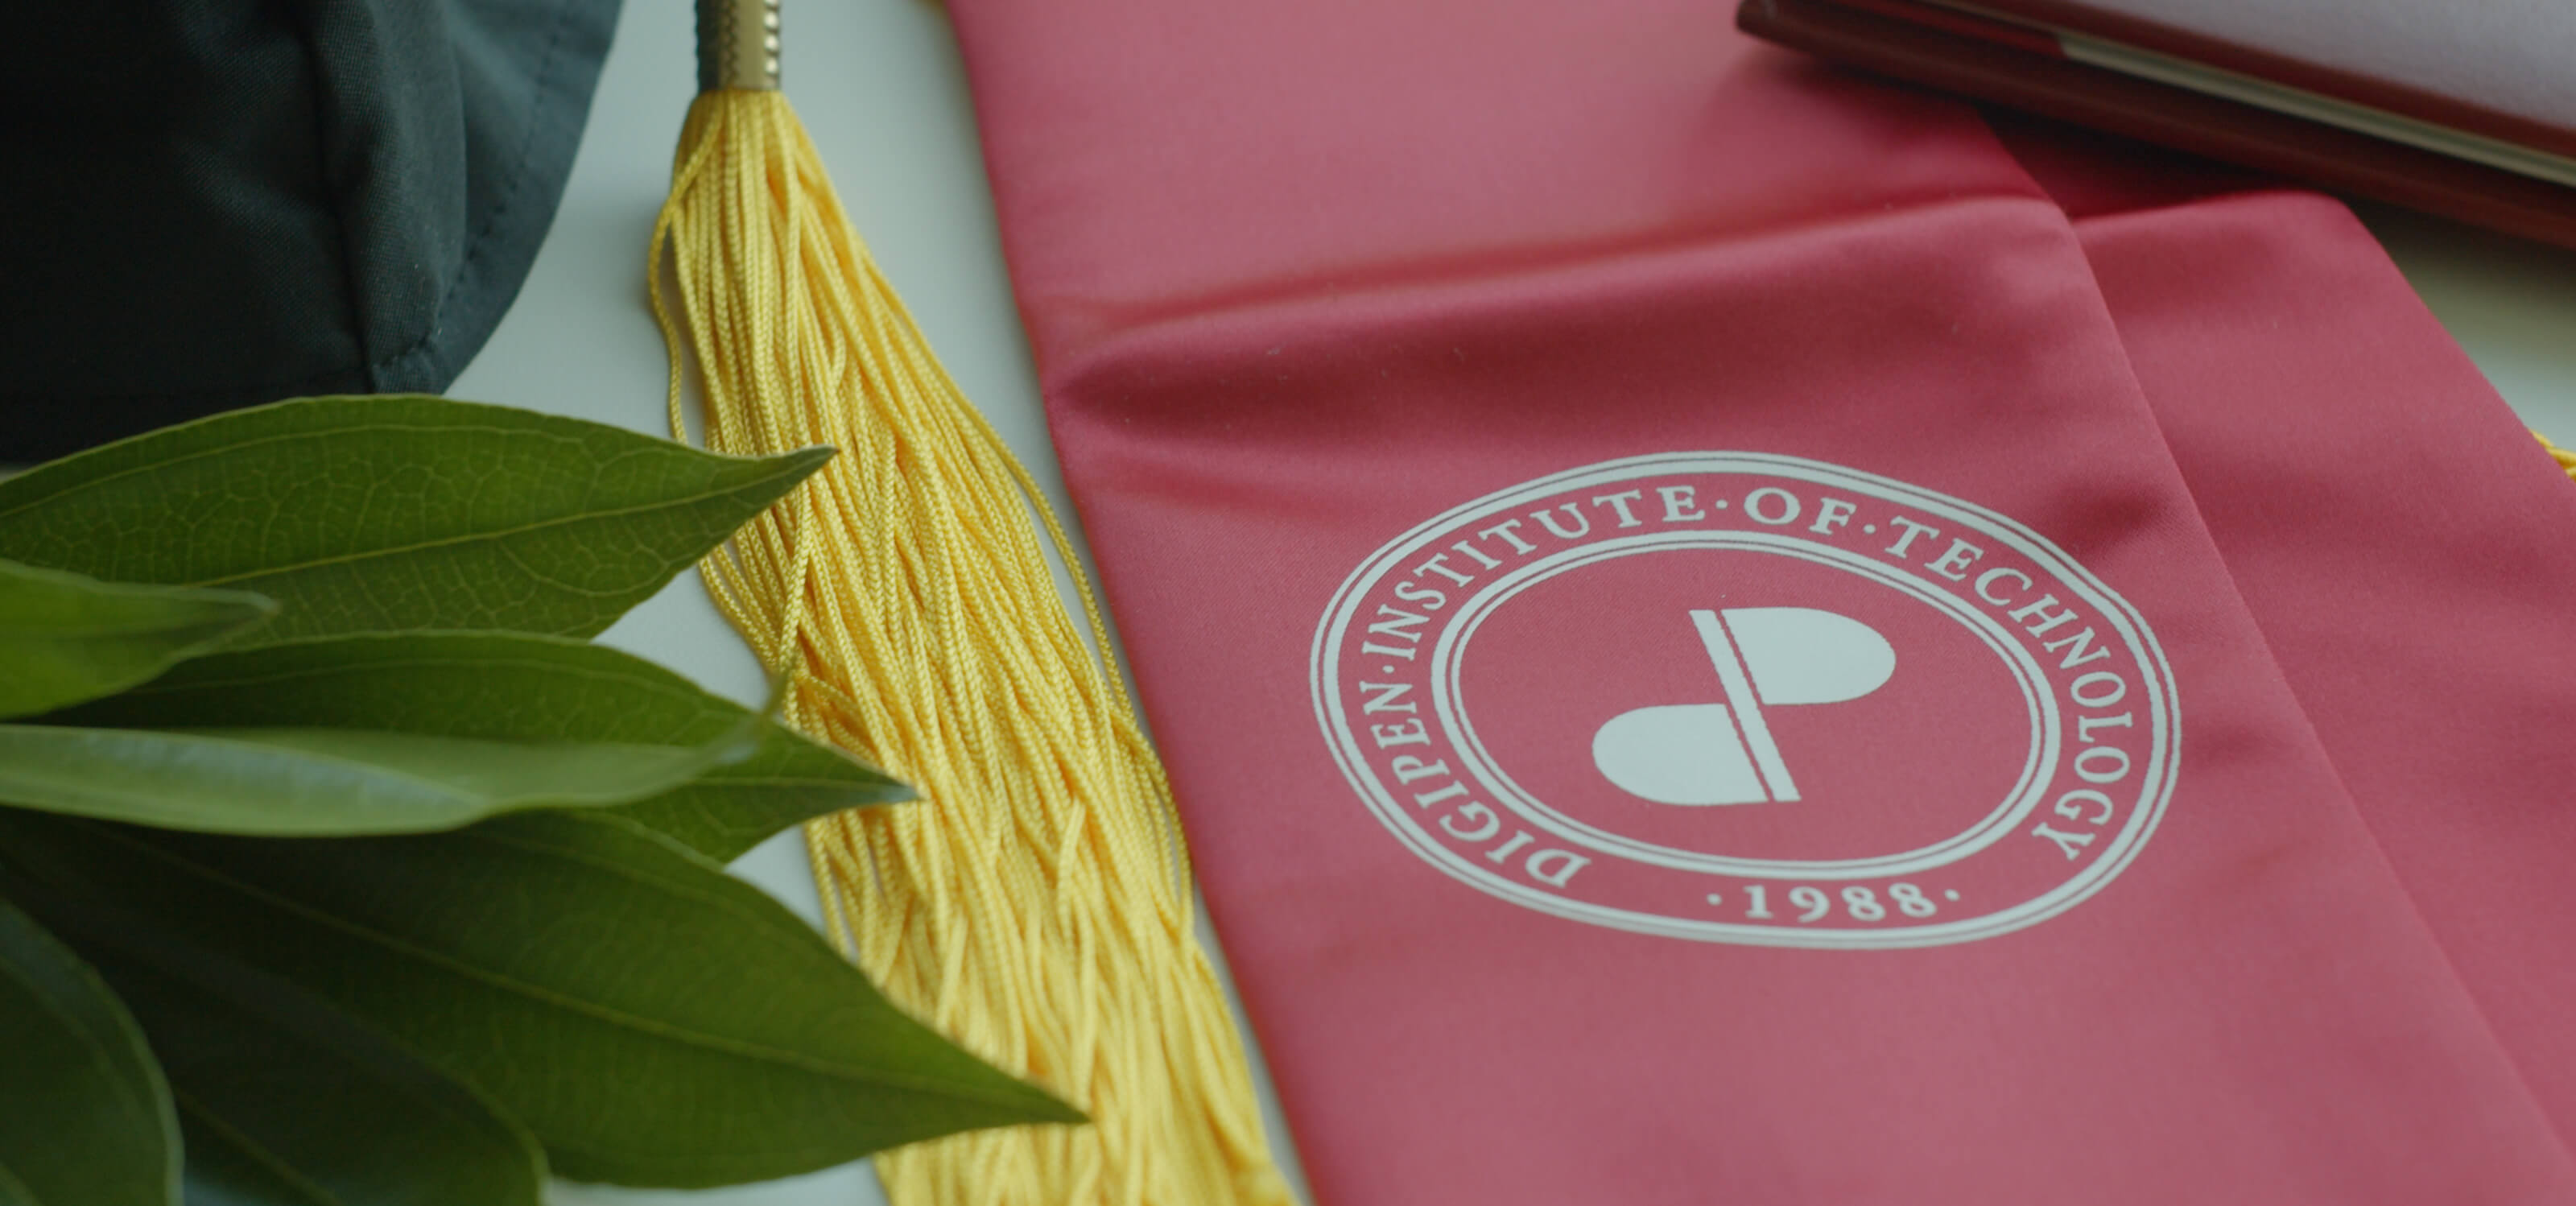 Red DigiPen graduation sash with a yellow tassel next to it